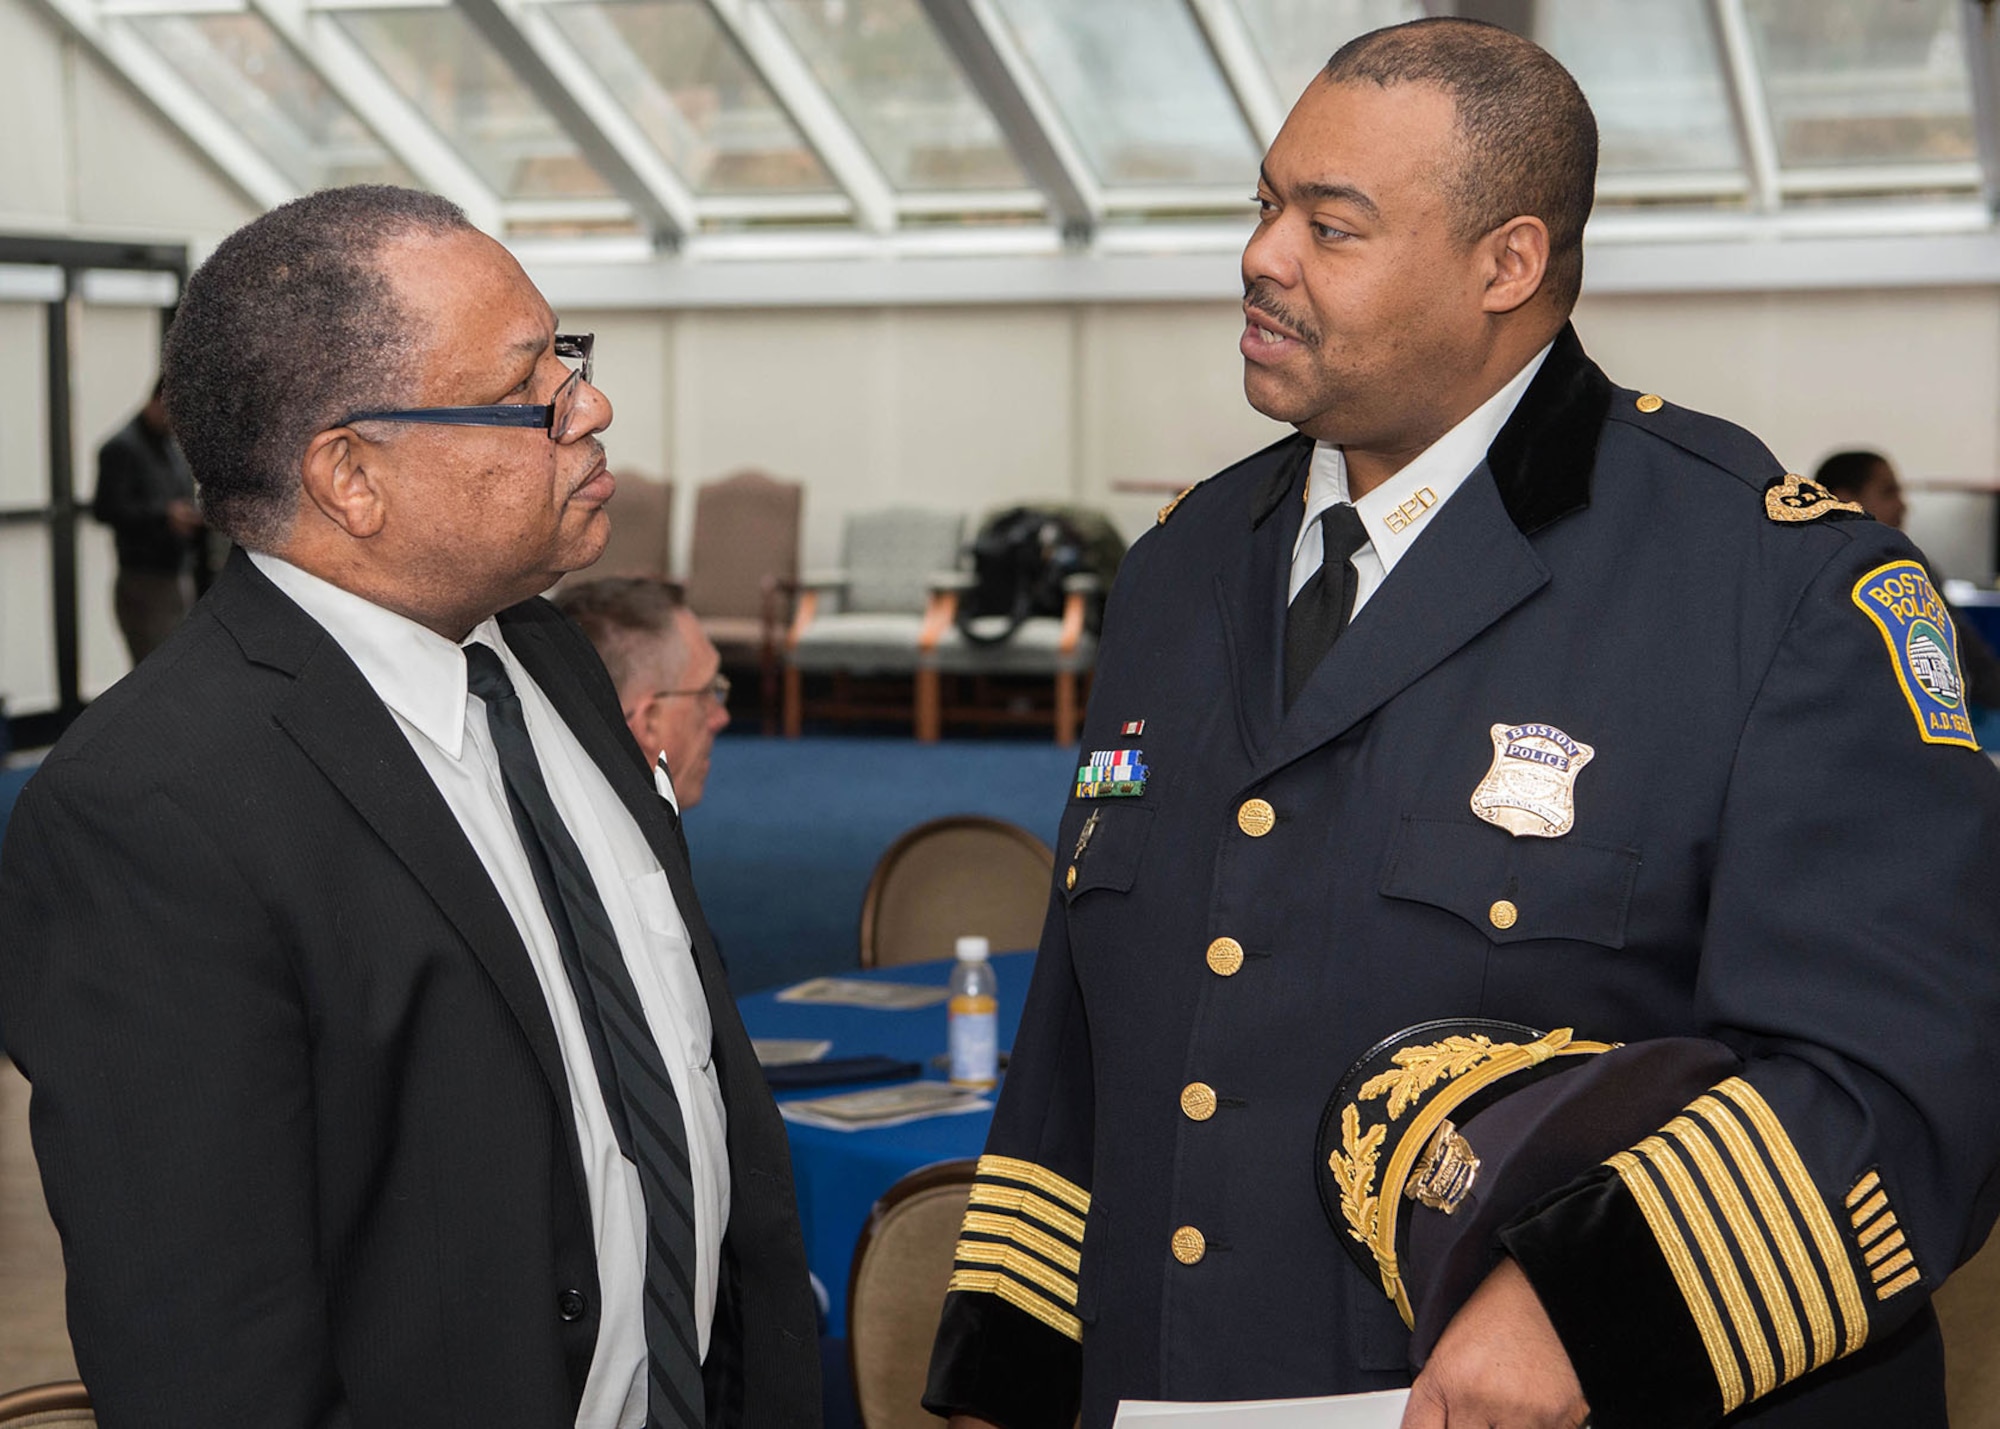 Boston Police Department Superintendent-in-Chief William G. Gross, right, speaks with Timothy Martin, 66th Security Forces Squadron employee, prior to a Dr. Martin Luther King, Jr., observance event at the Minuteman Commons Jan. 30. Gross was the event's guest speaker and Martin performed a re-enactment of MLK's "I Have a Dream" speech. (U.S. Air Force photo by Jerry Saslav)